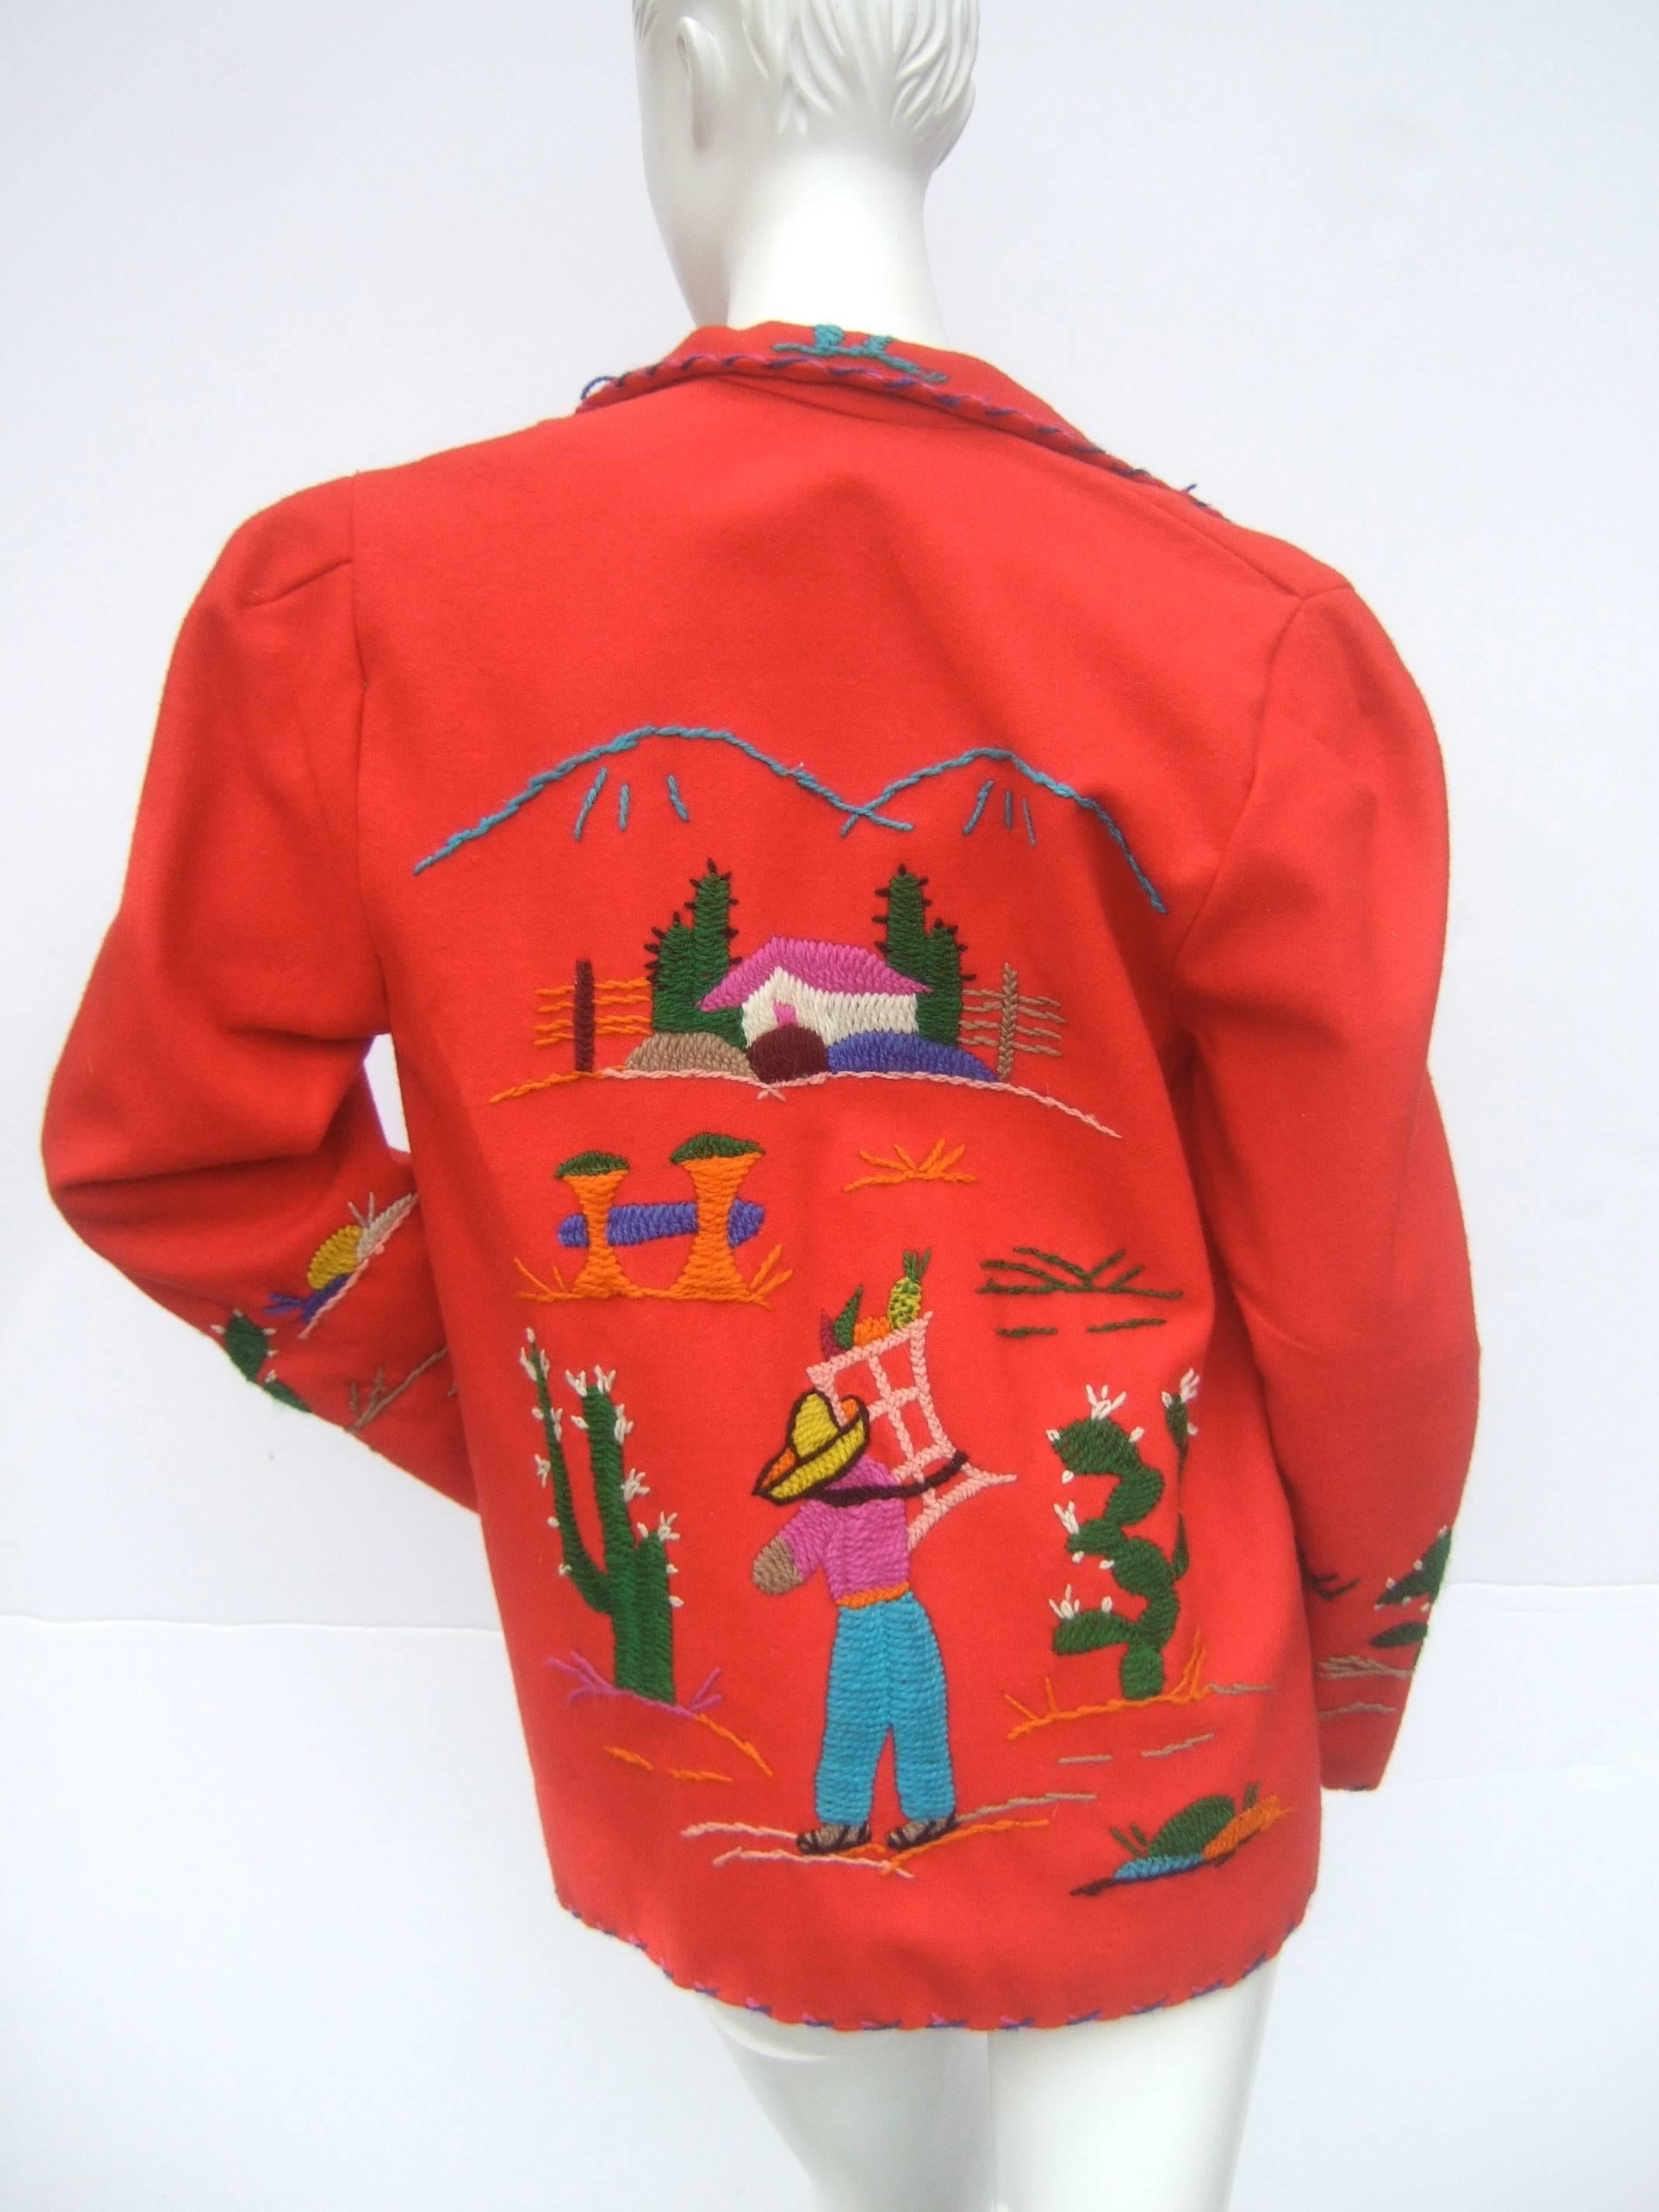 Mexican red felt wool embroidered jacket ca 1950s
The unique vintage wool jacket is accented
with embroidered cactus and designs

The collar and border edges have contrasting
embroidered stitching. The front of the jacket
has a deep patch